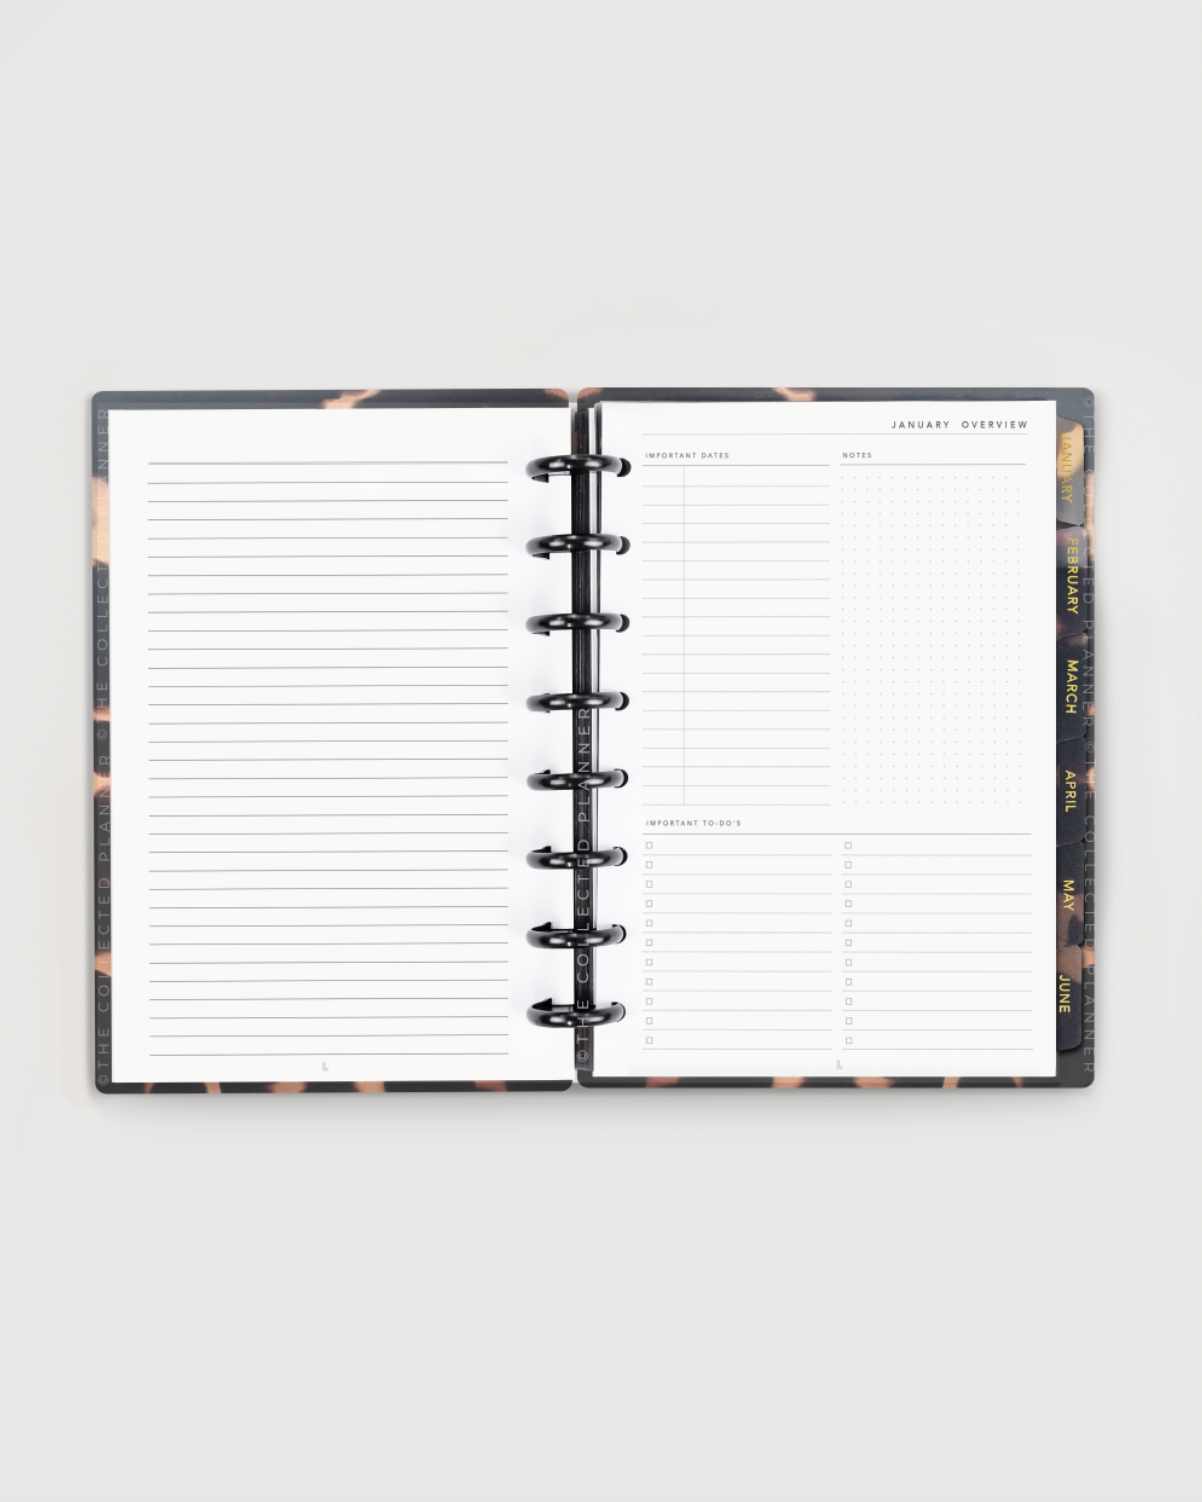 Monthly View of the 2022 Junior Discbound Half Letter Planner Canada USA The Collected Planner Productivity and Business